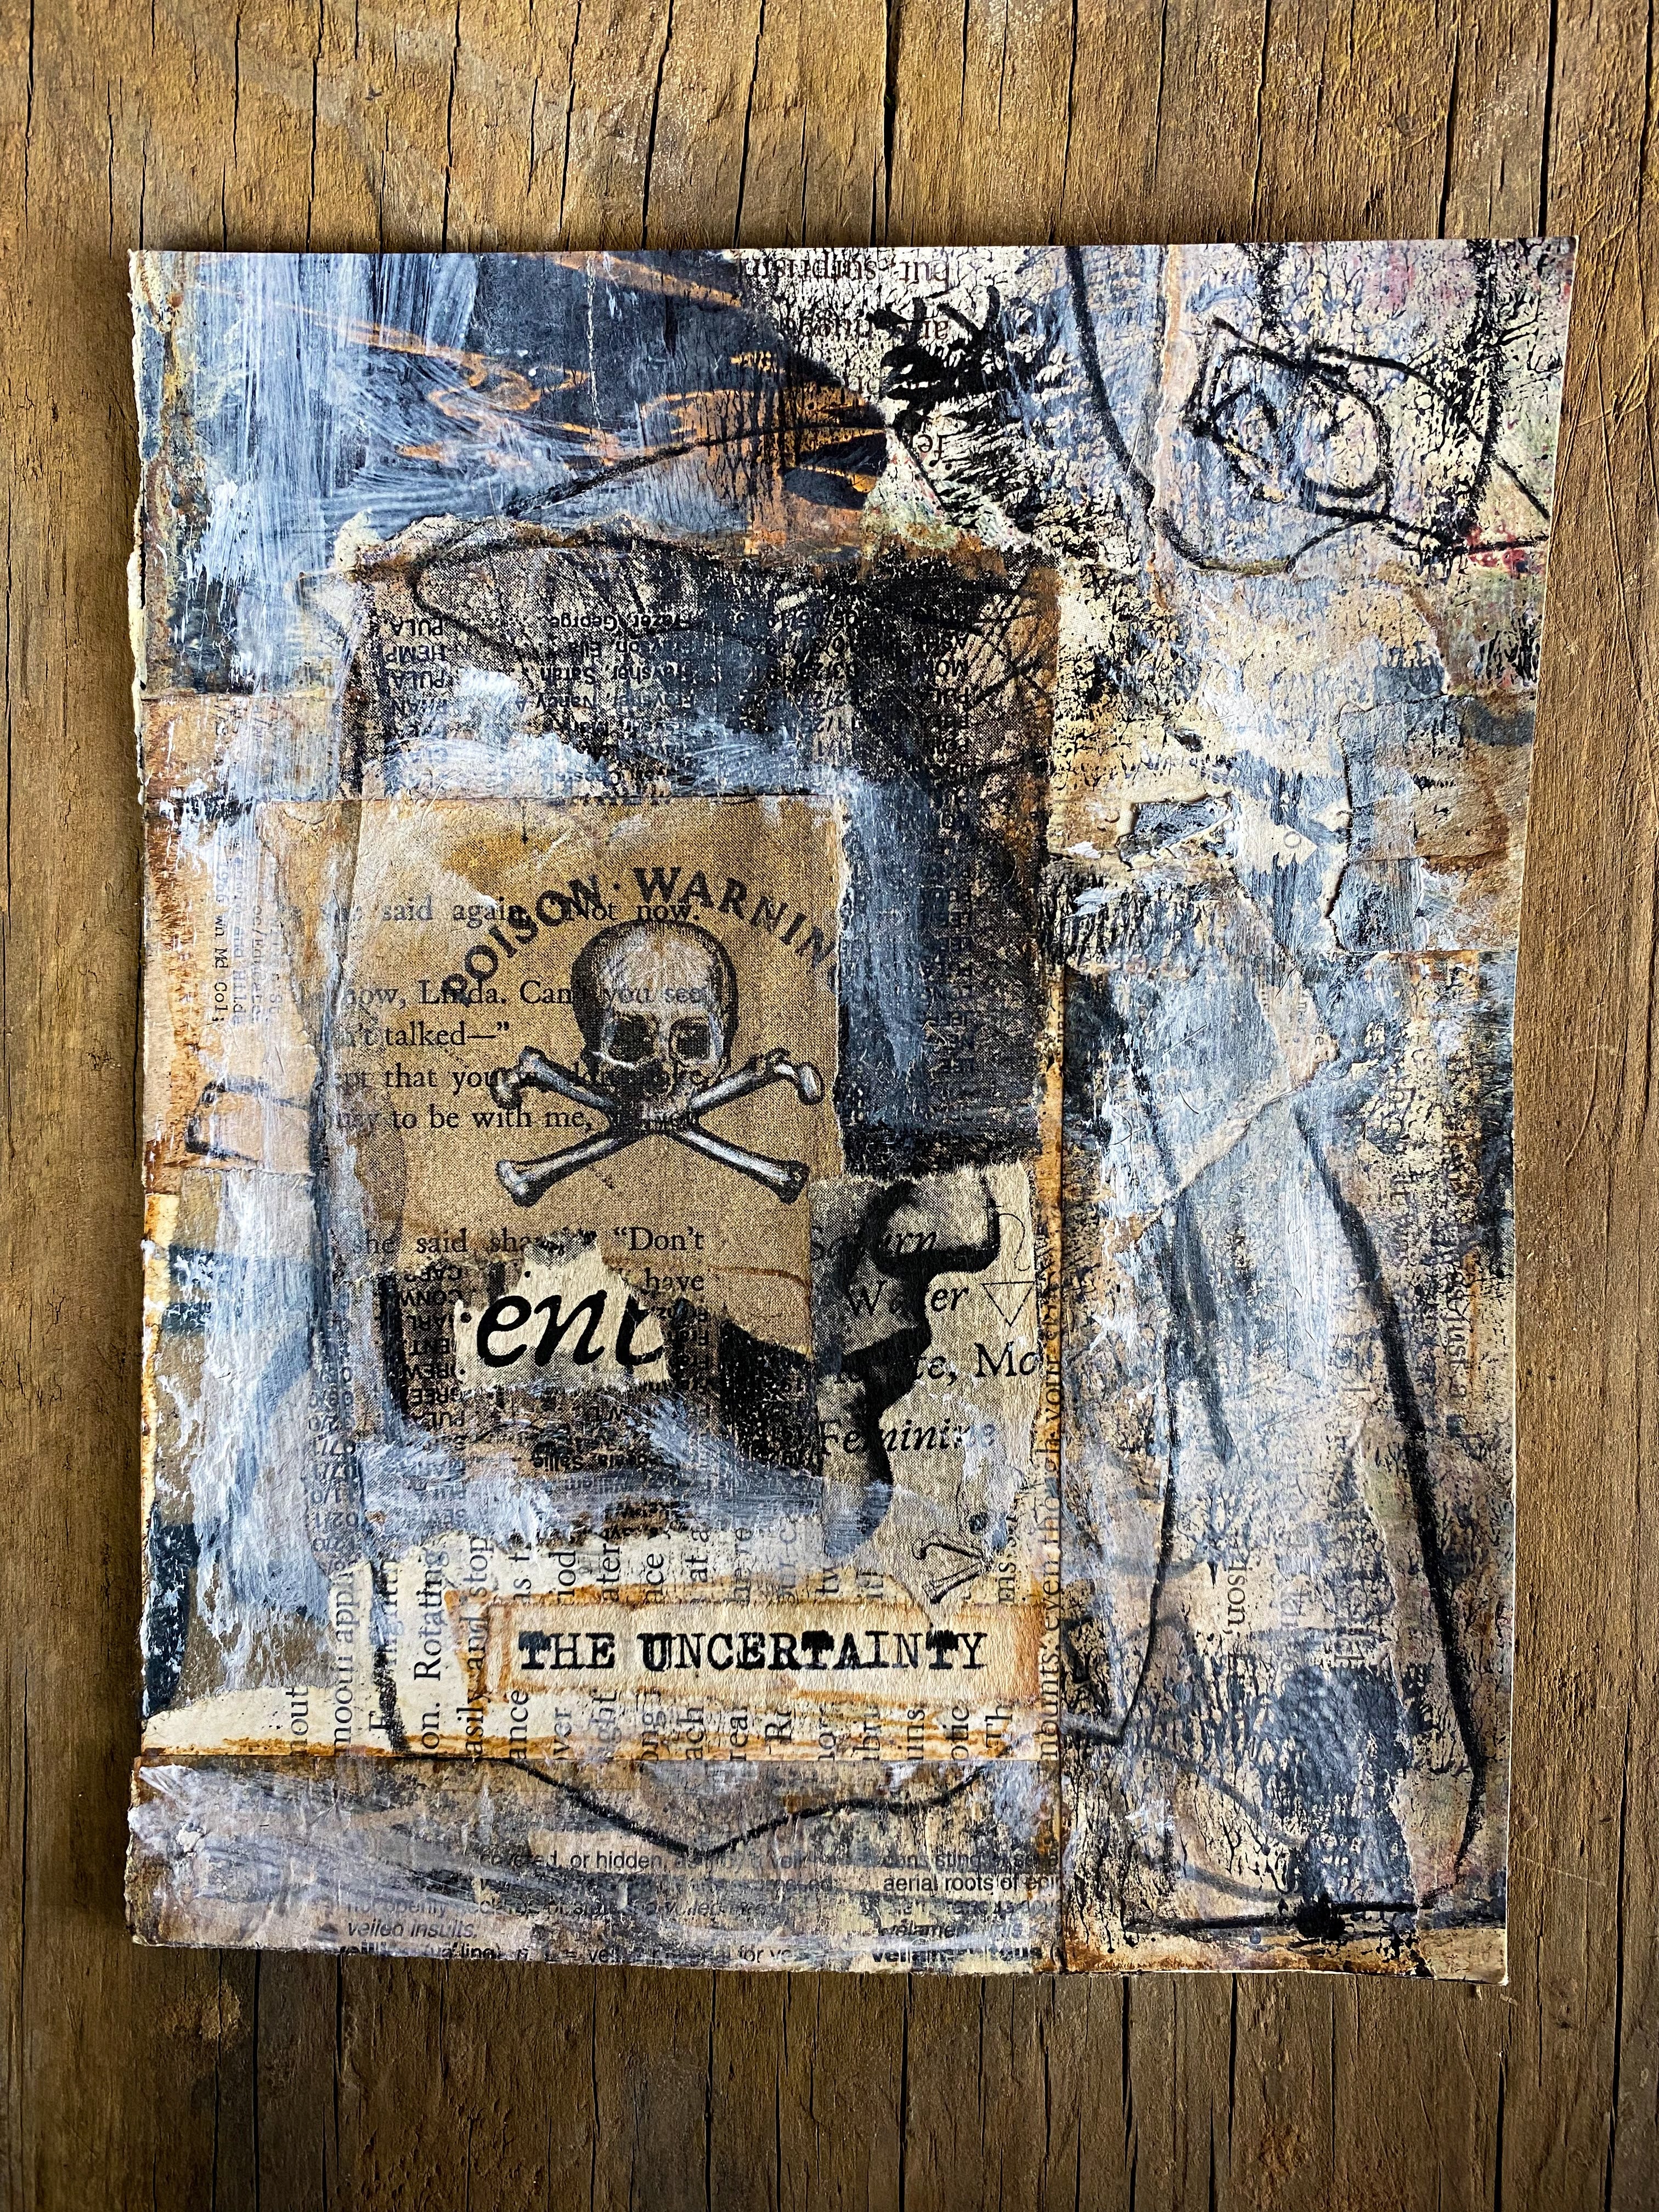 The Uncertainty - Original Mixed Media Collage